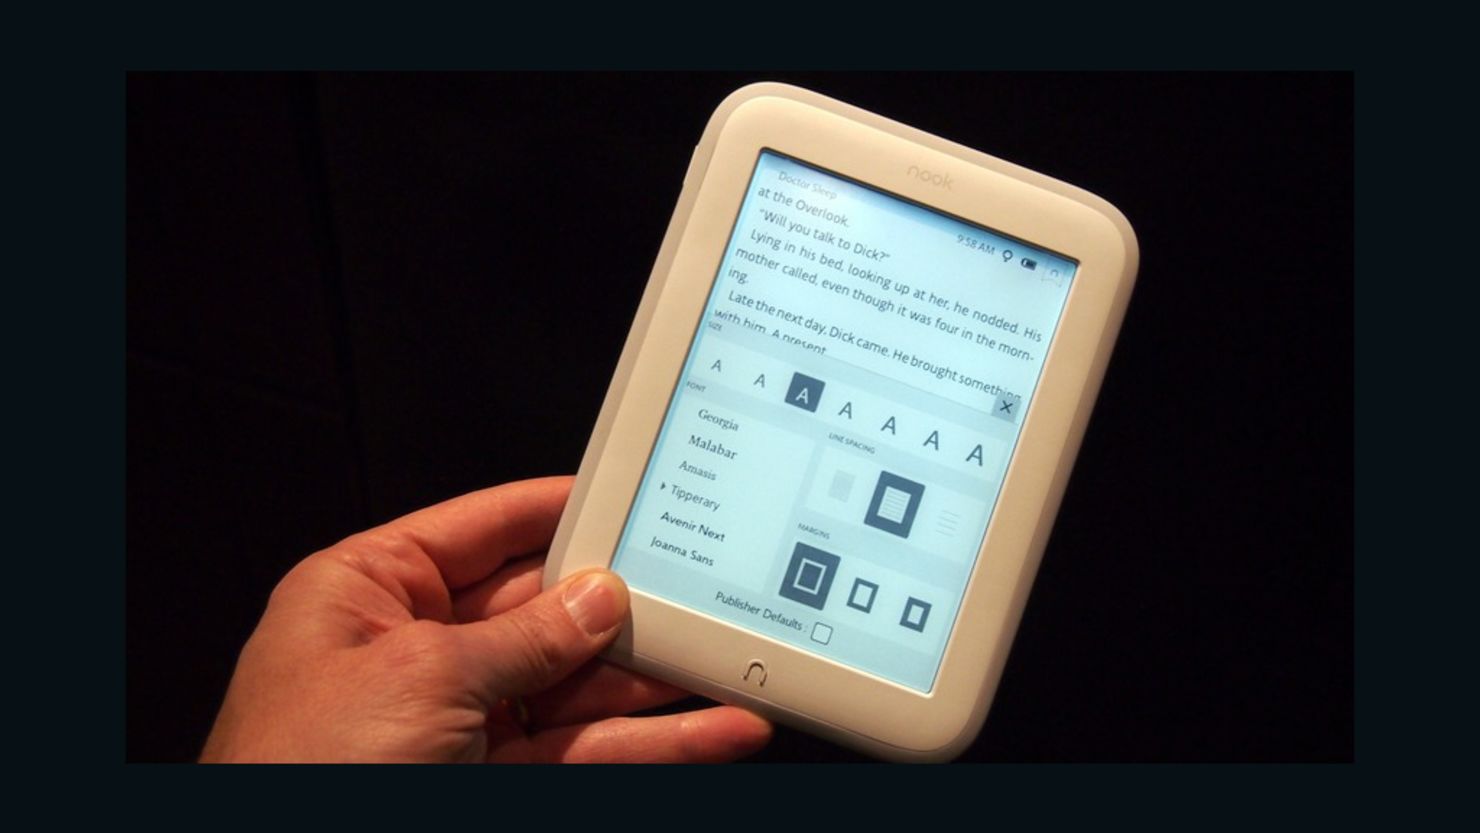 A 4GB version of the new Nook GlowLight, the ultra-light e-reader from Barnes & Noble, sells for $119.